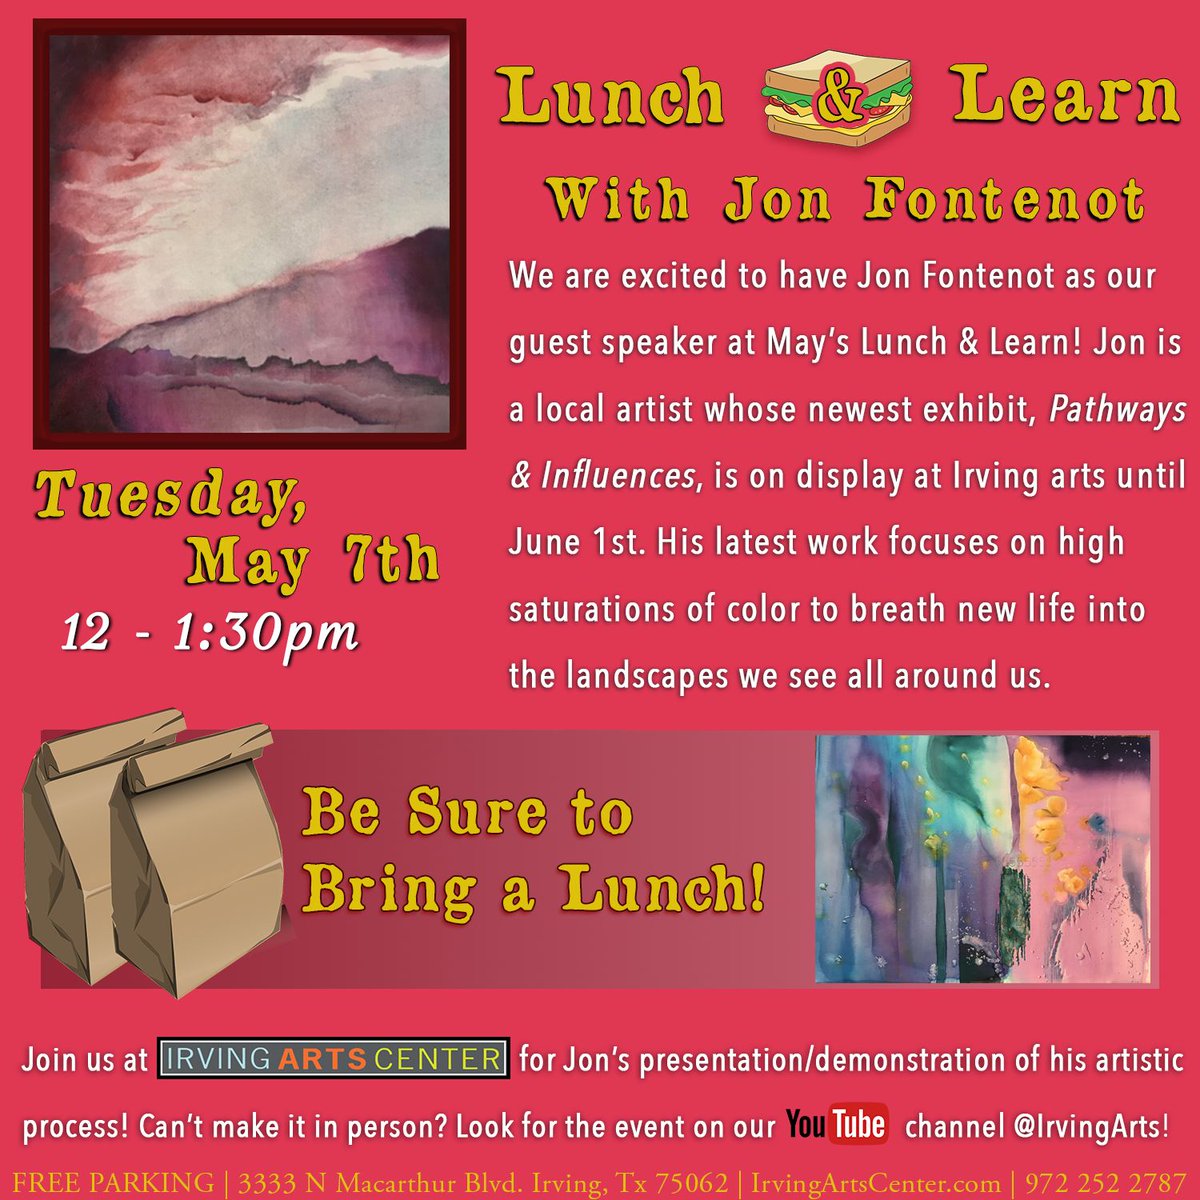 Don't miss learning about Jon's beautiful work next week! This is our last L&L until we open again in September! #lunchandlearn #artclass #artdemonstration #irvingtx #irvingarts #freeevent #artexhibit #artlecture #dallastx #demonstration #artdemo